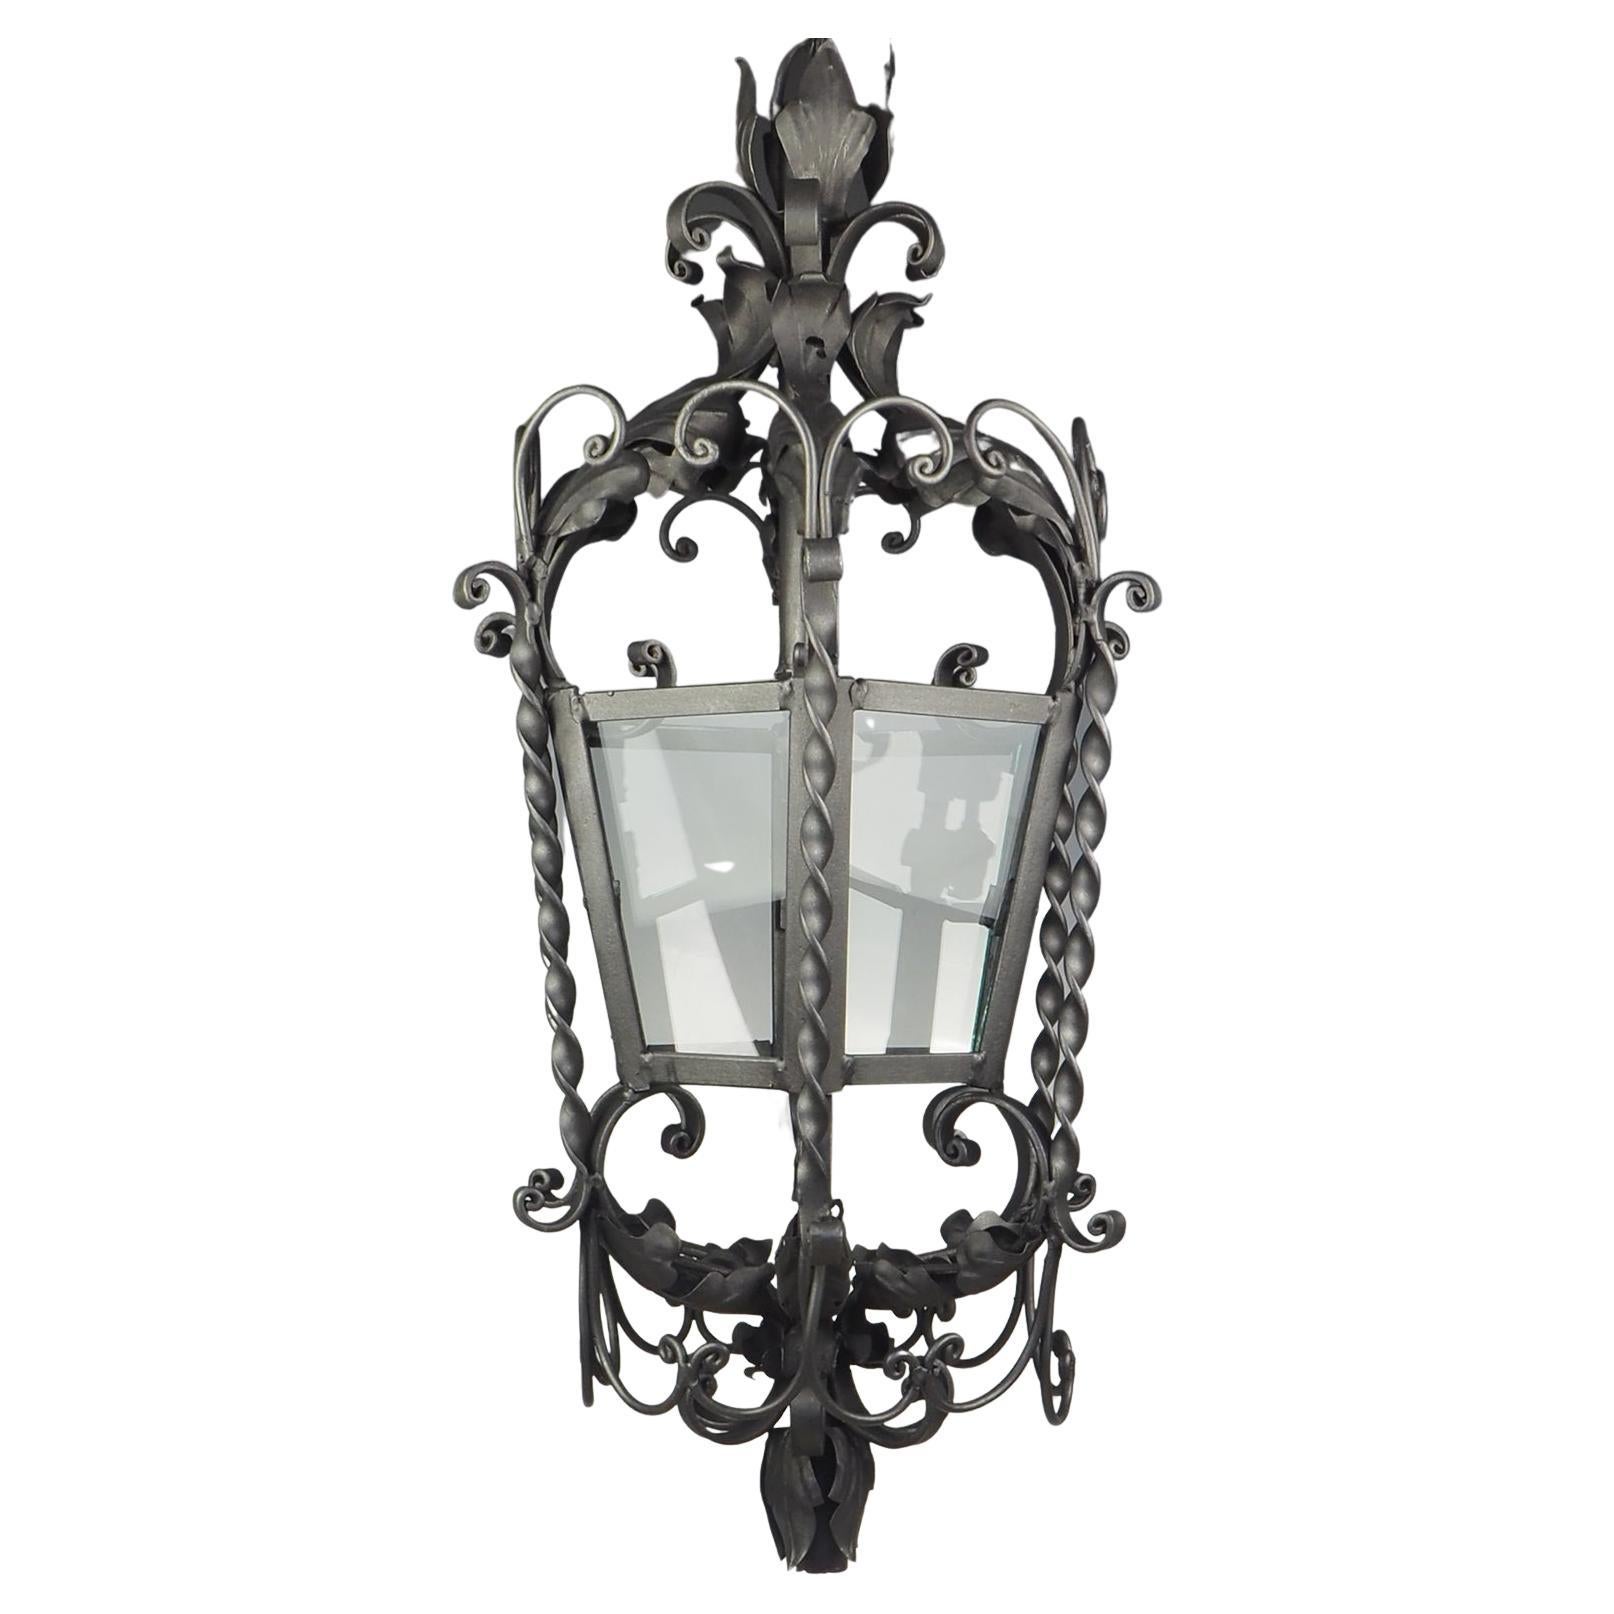 19th Century Large Ornate French Wrought Iron Lantern For Sale